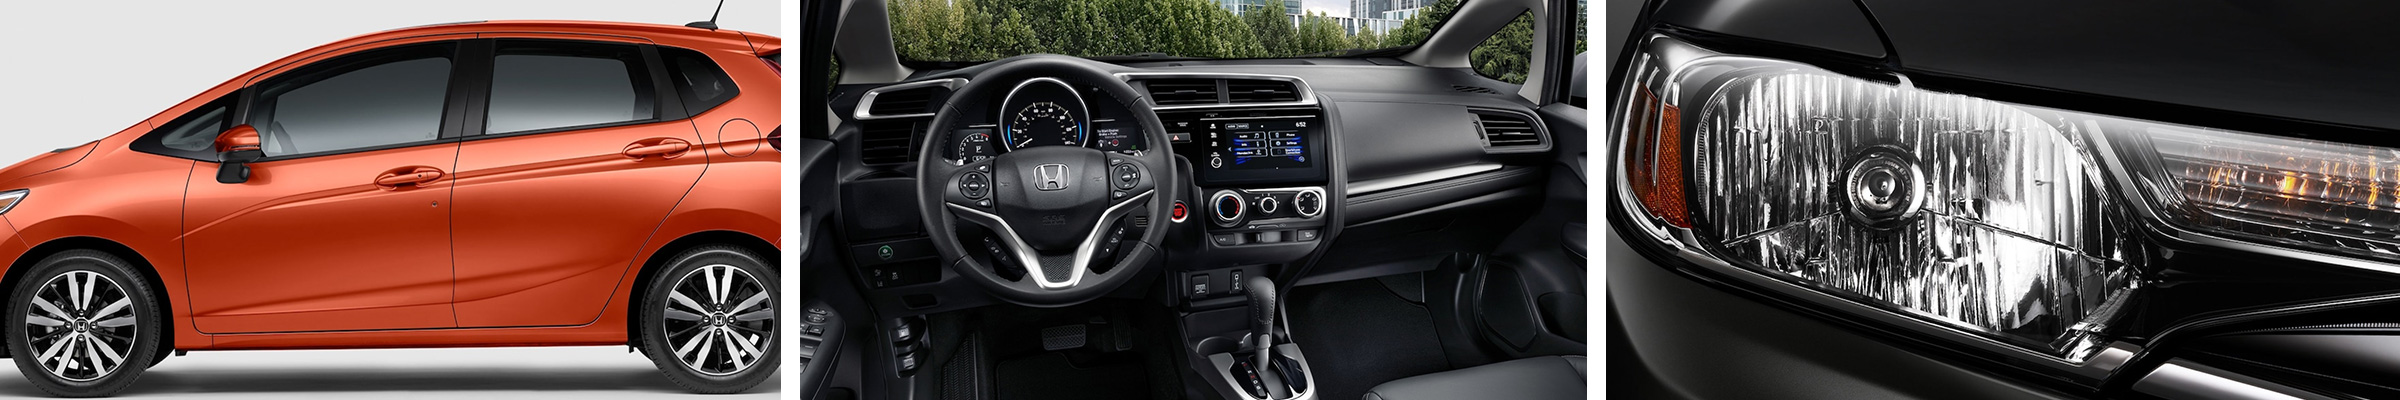 2020 Honda Fit For Sale Houston TX | Sugarland